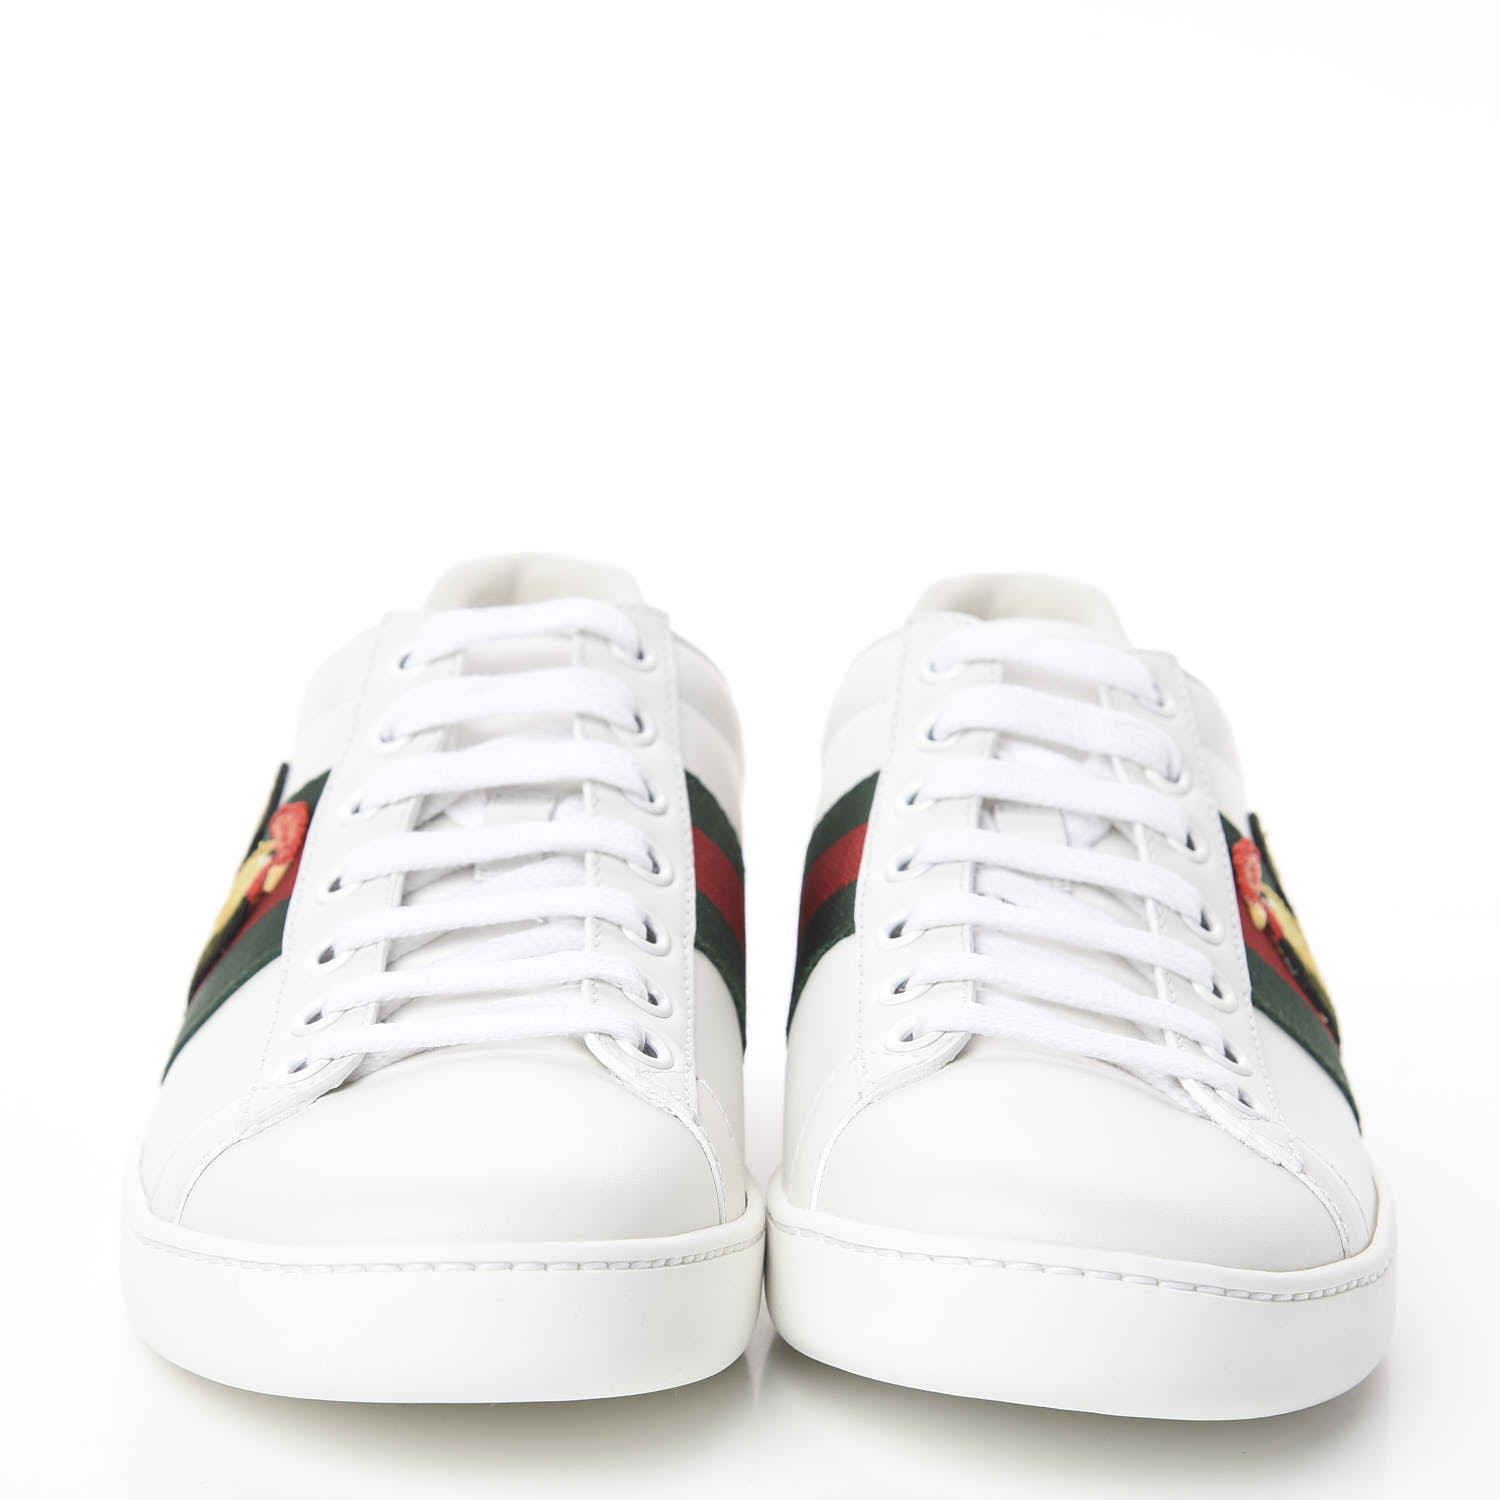 gucci rooster sneakers